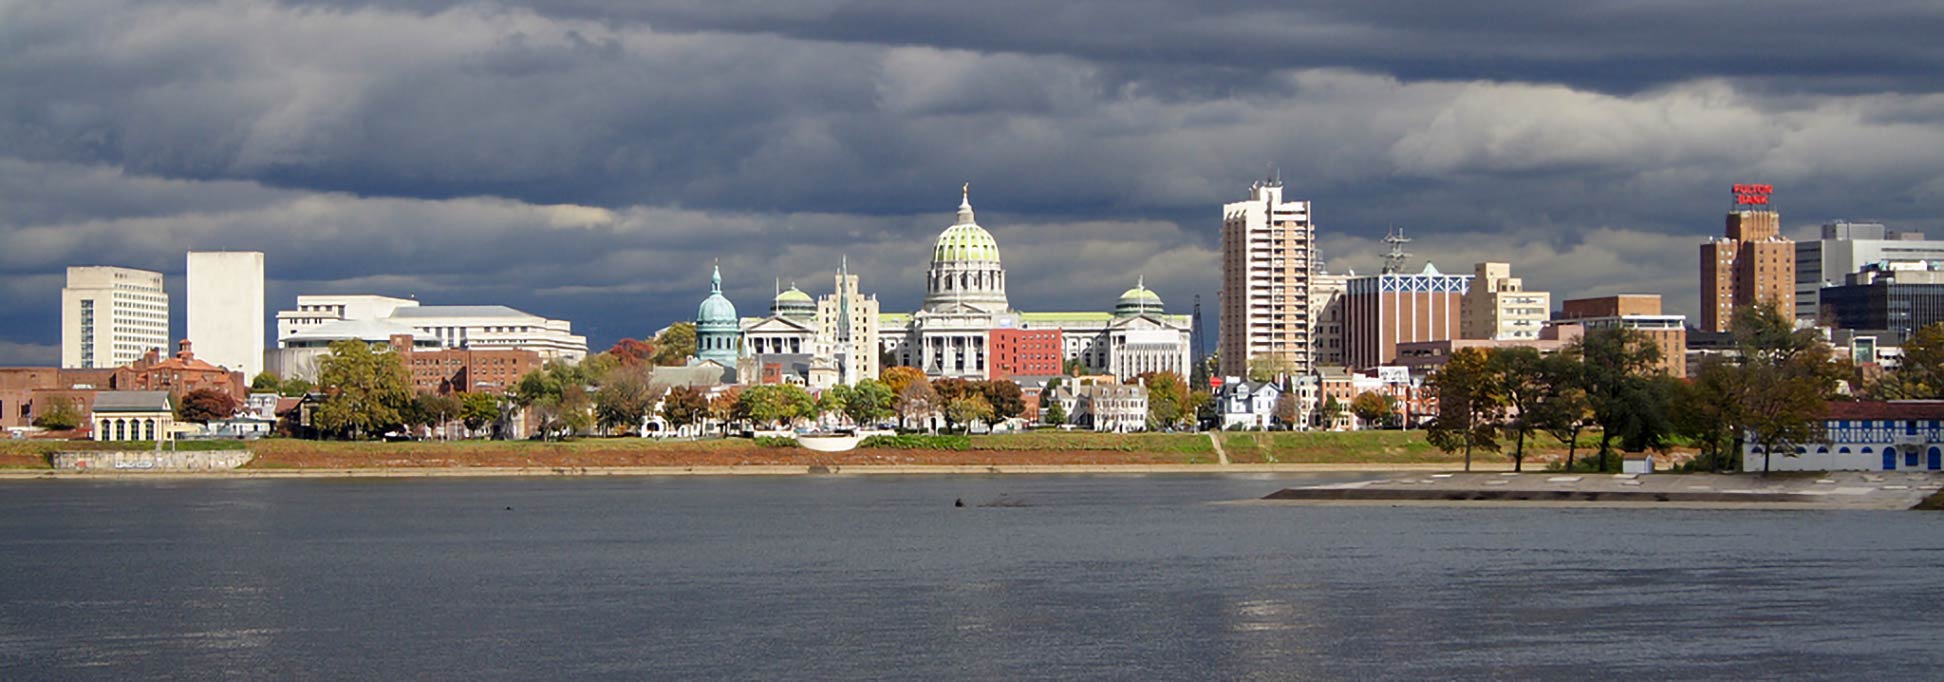 View of Harrisburg at Susquehanna River, capital of  Pennsylvania, with State Capitol Building